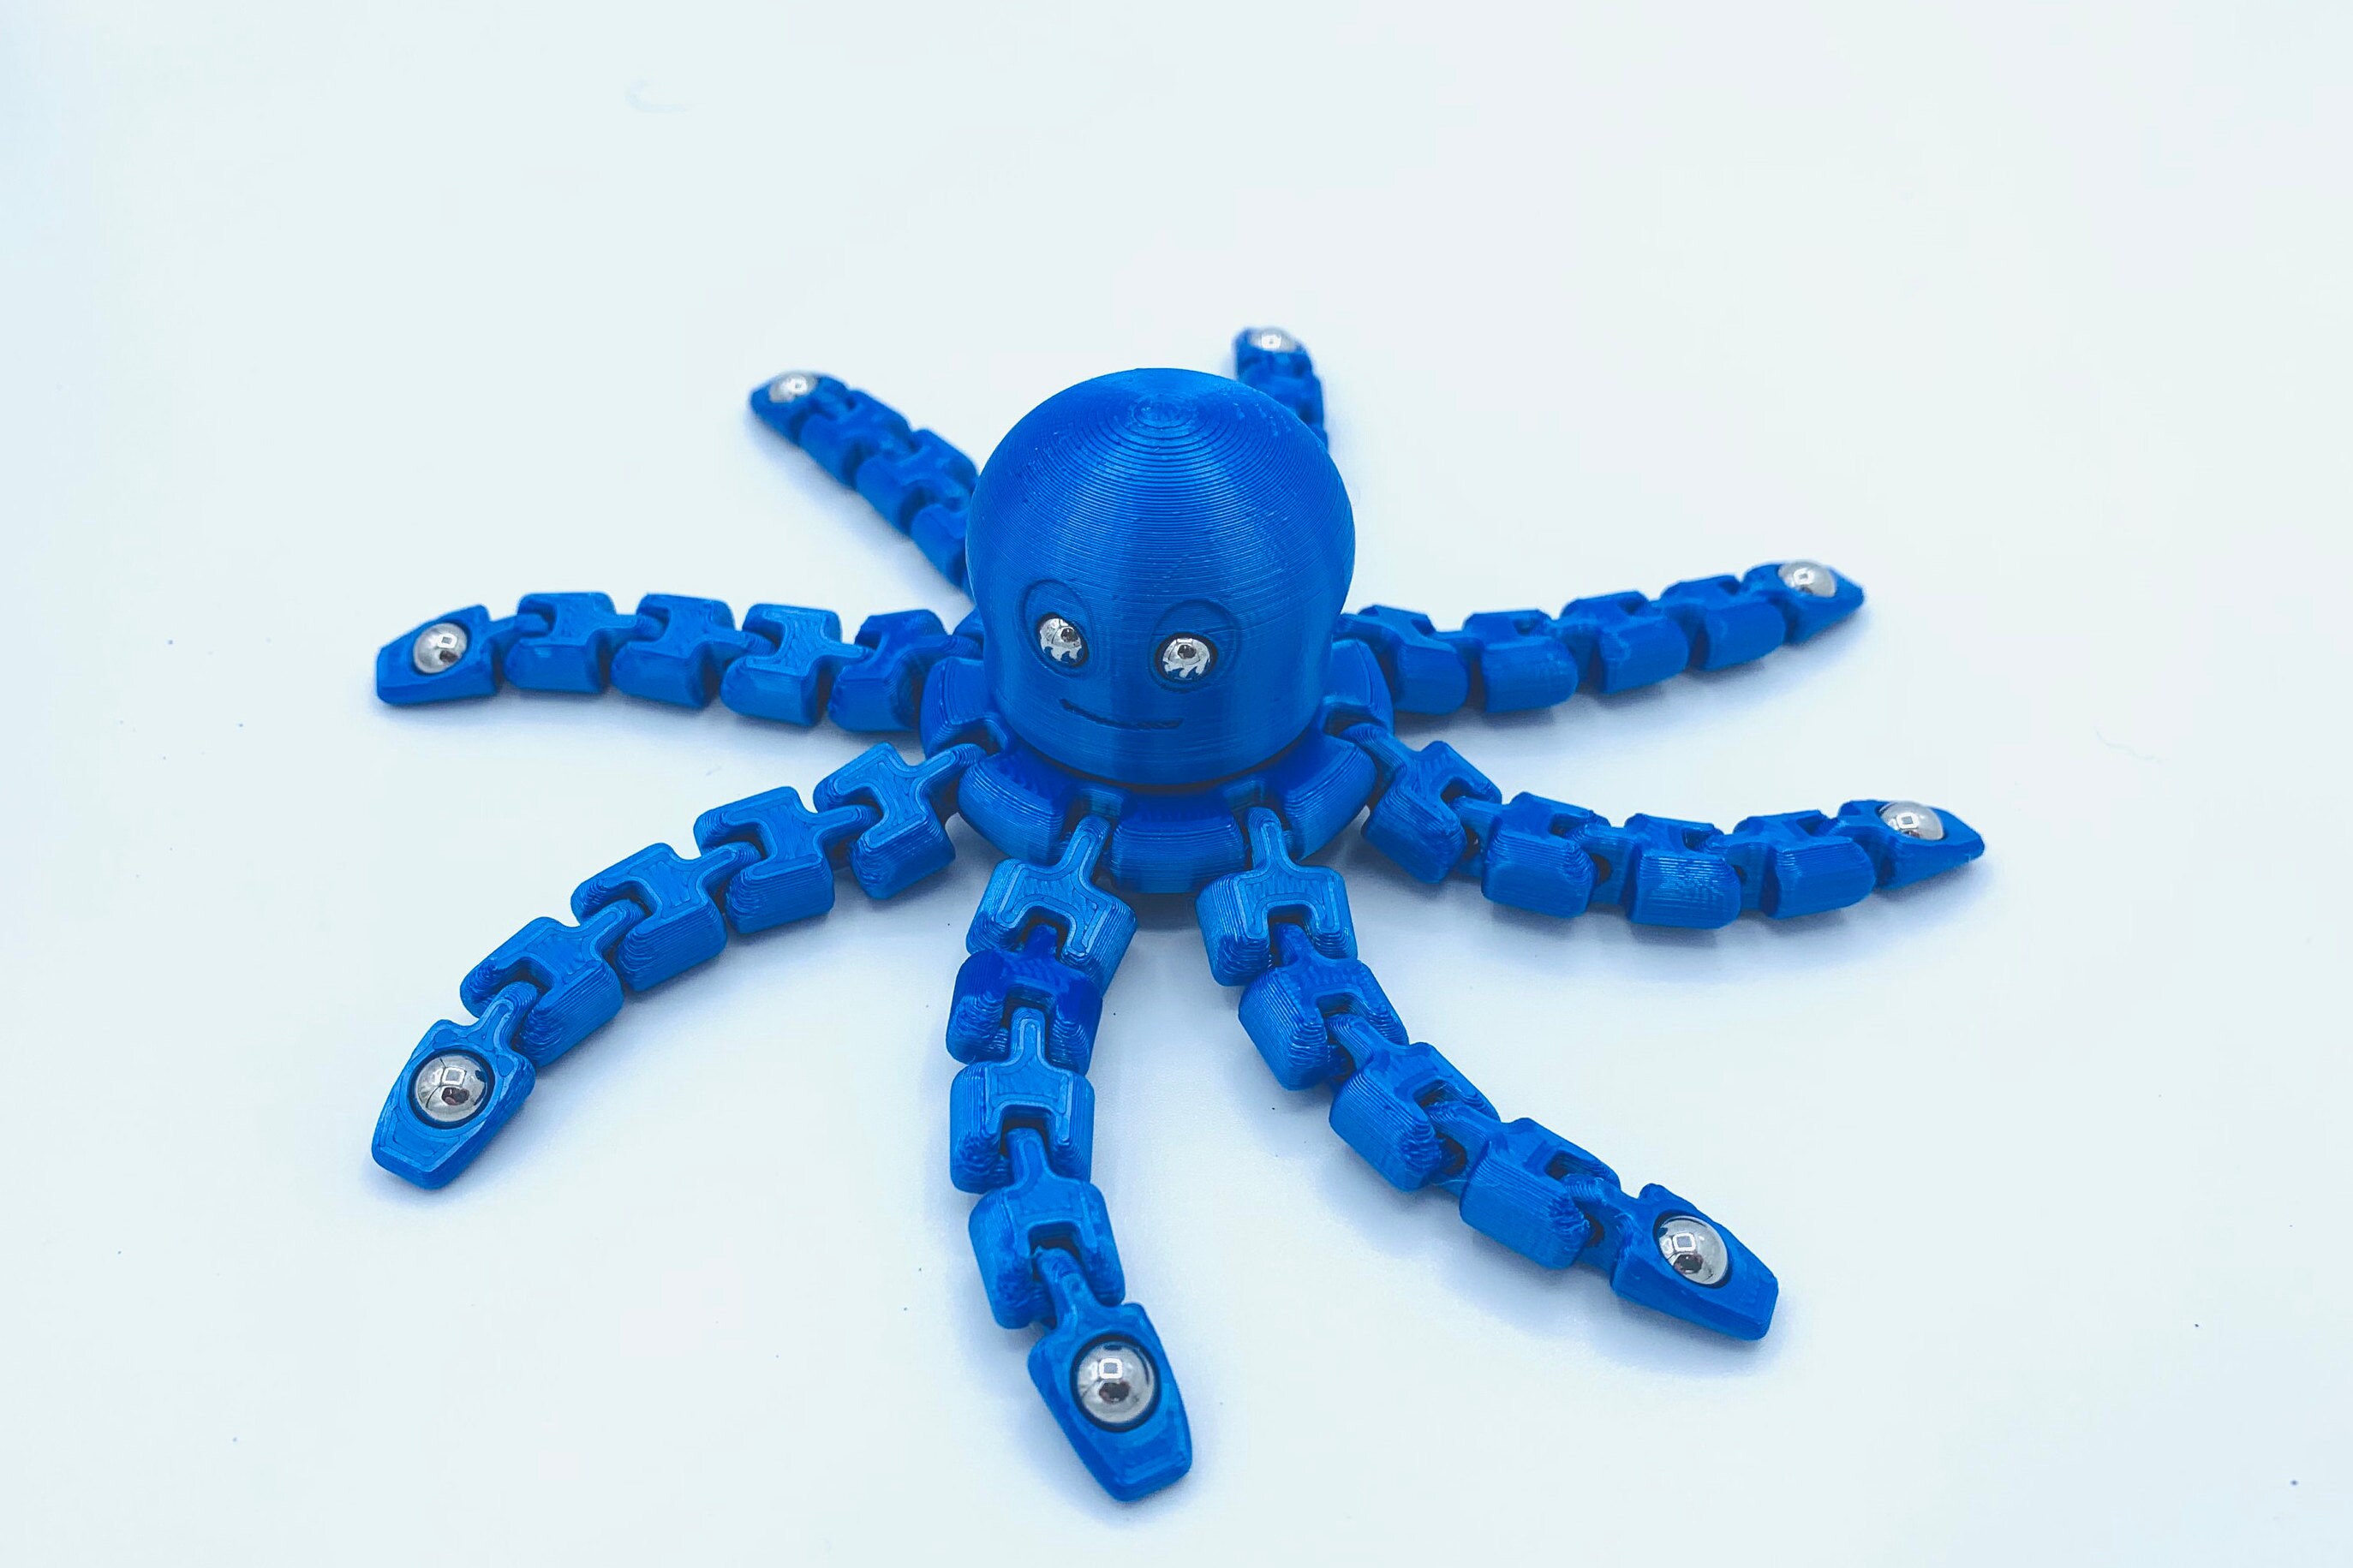 Realistic Spider Fidget Toy 3D Printed Articulated Spinner 